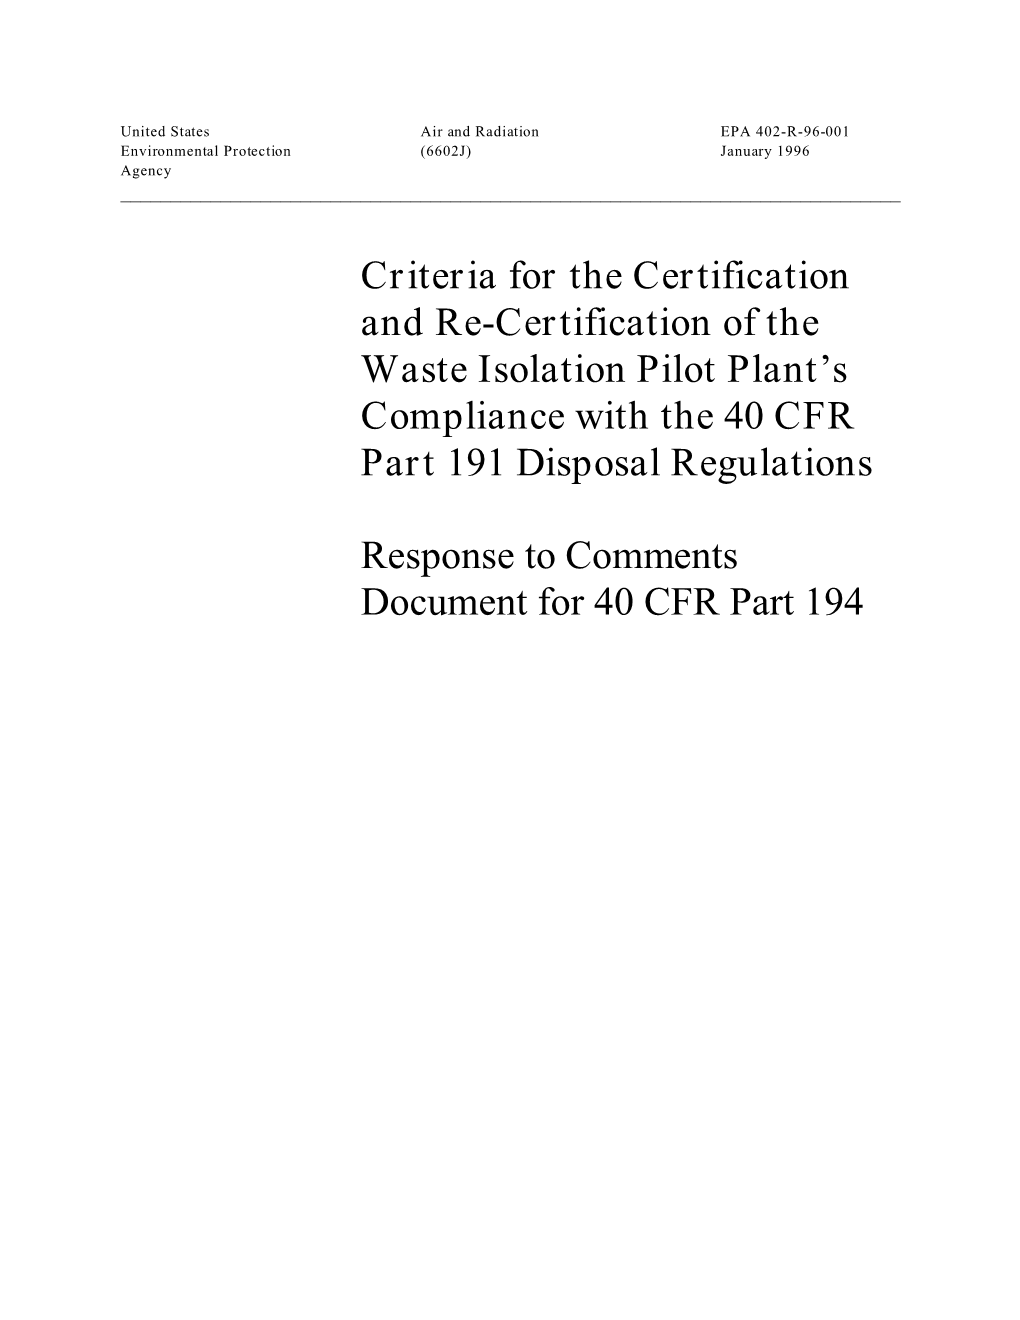 Response to Comments Document for 40 CFR Part 194: Criteria for the Certification and Re-Certification